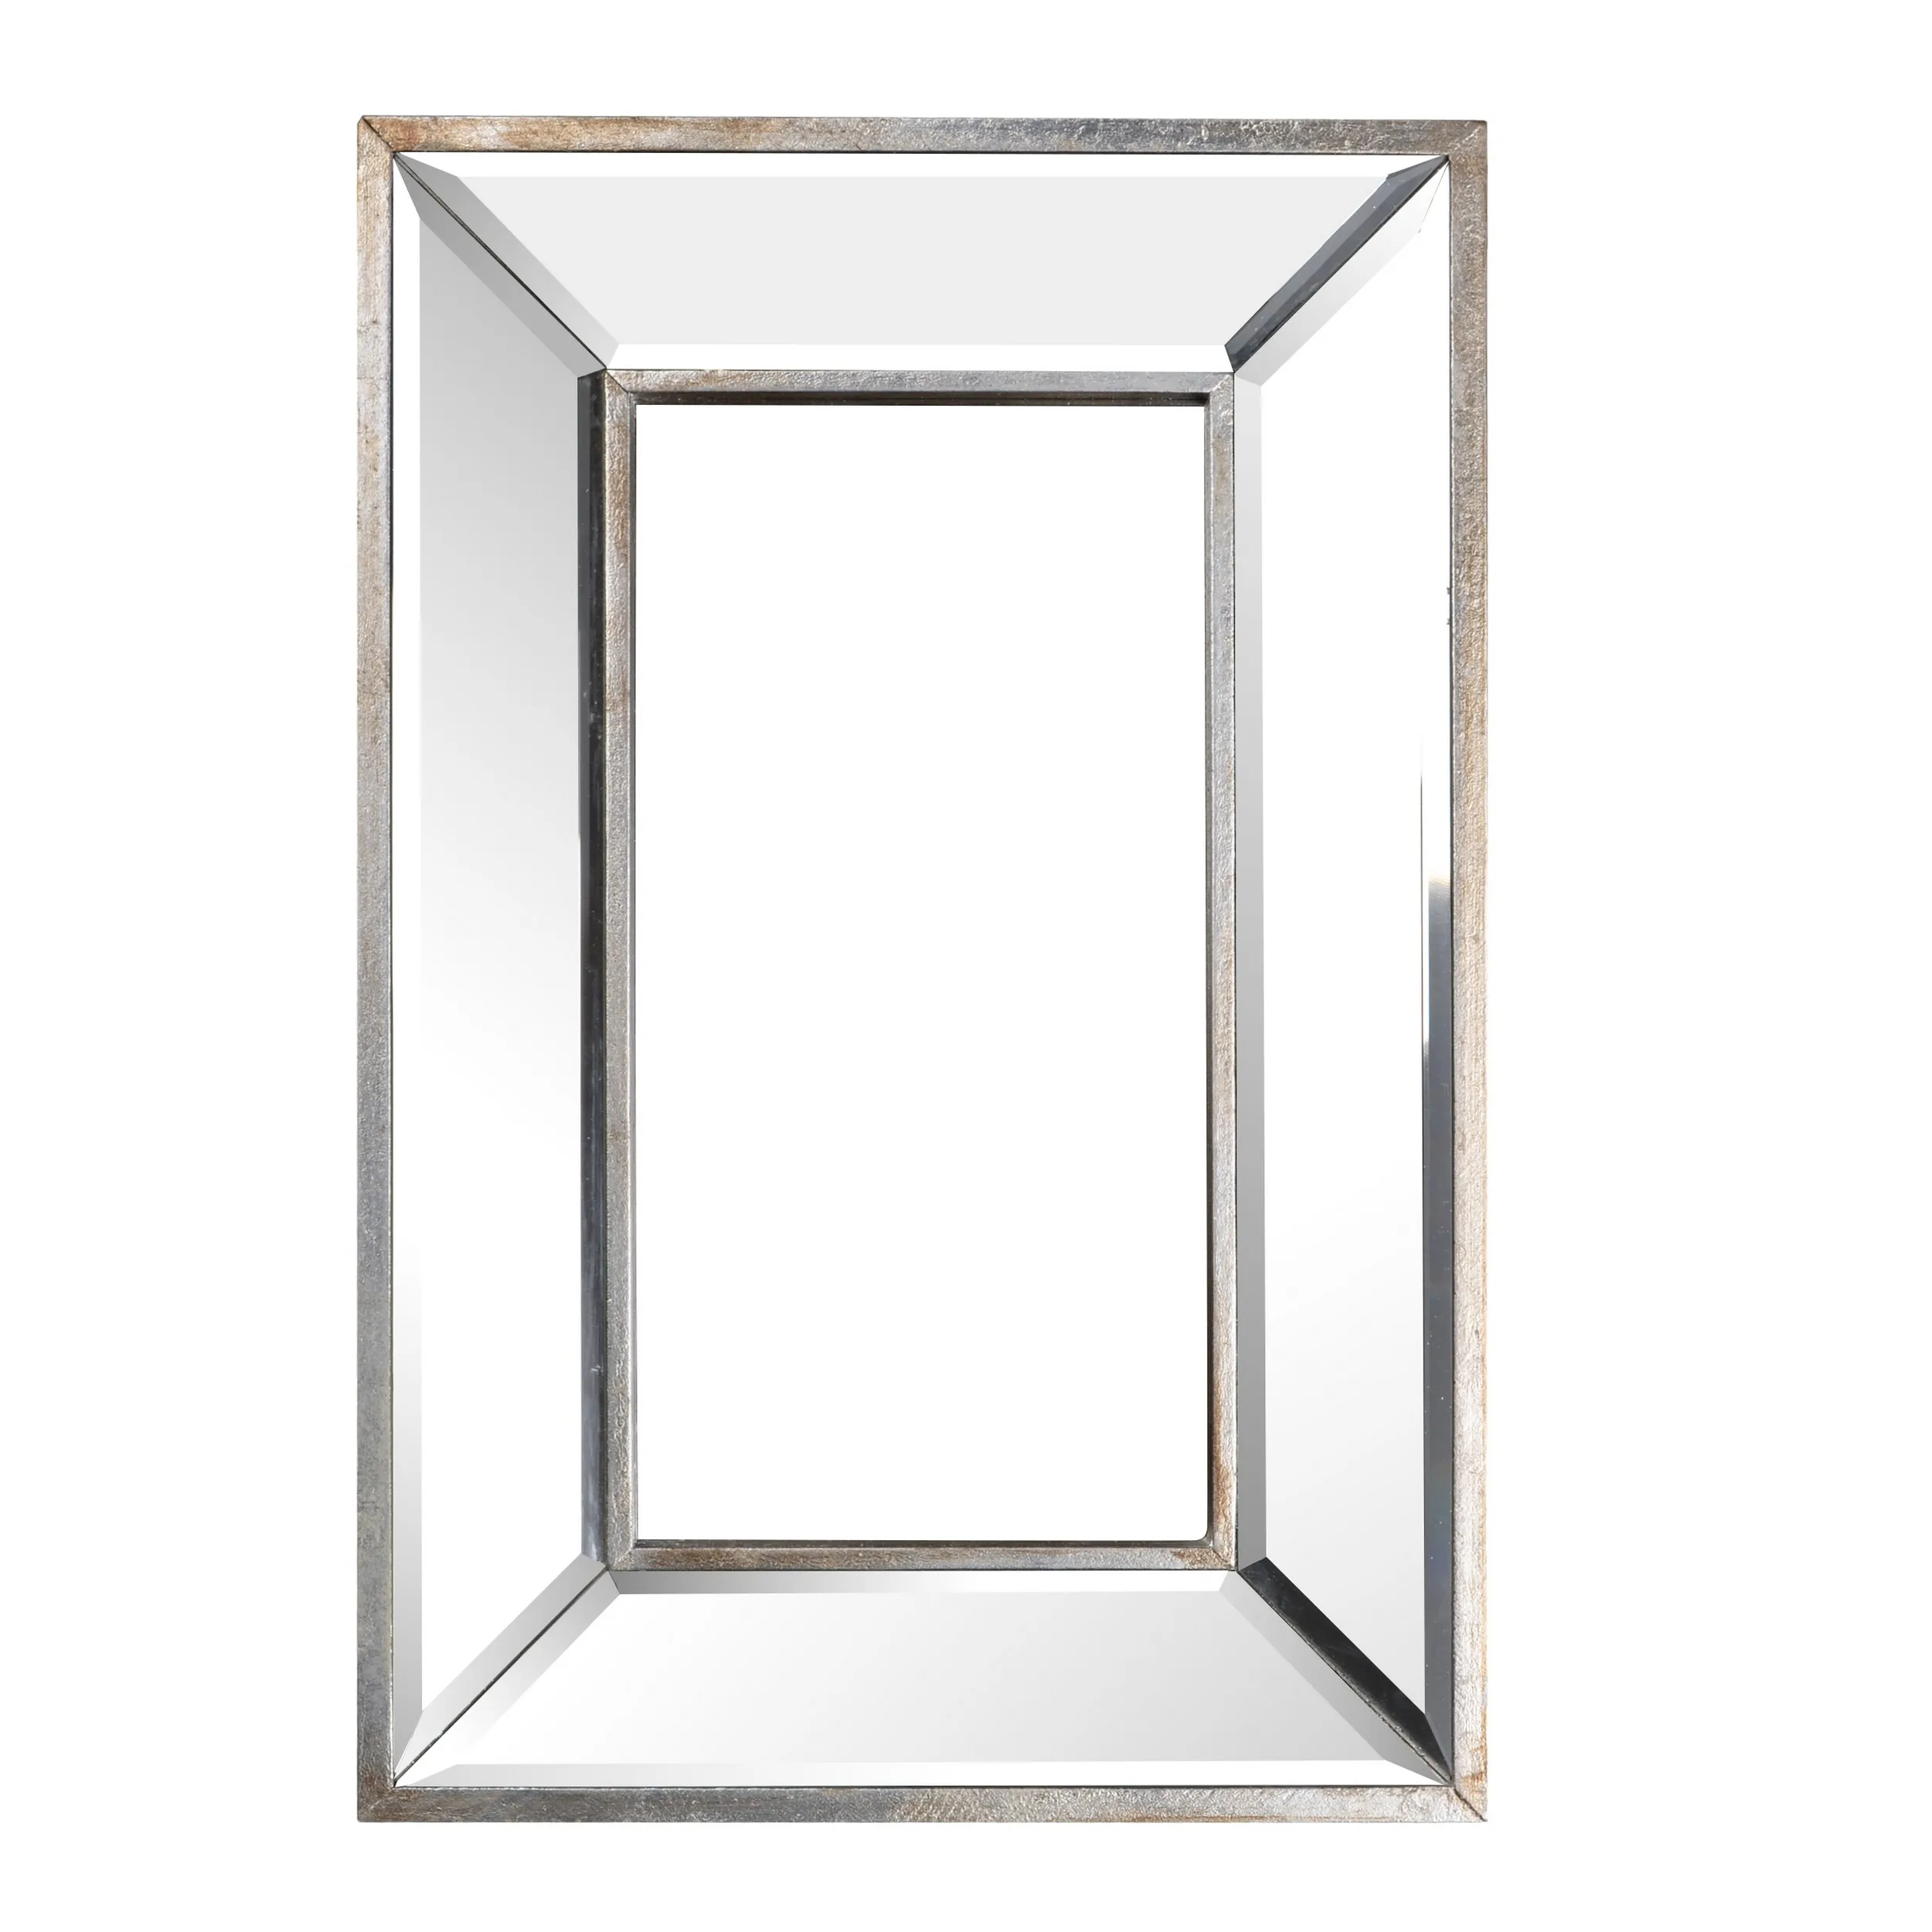 Toby 12 x 18 Inch Wall Mount Accent Mirror, Antique Silver Wood Frame-Benzara